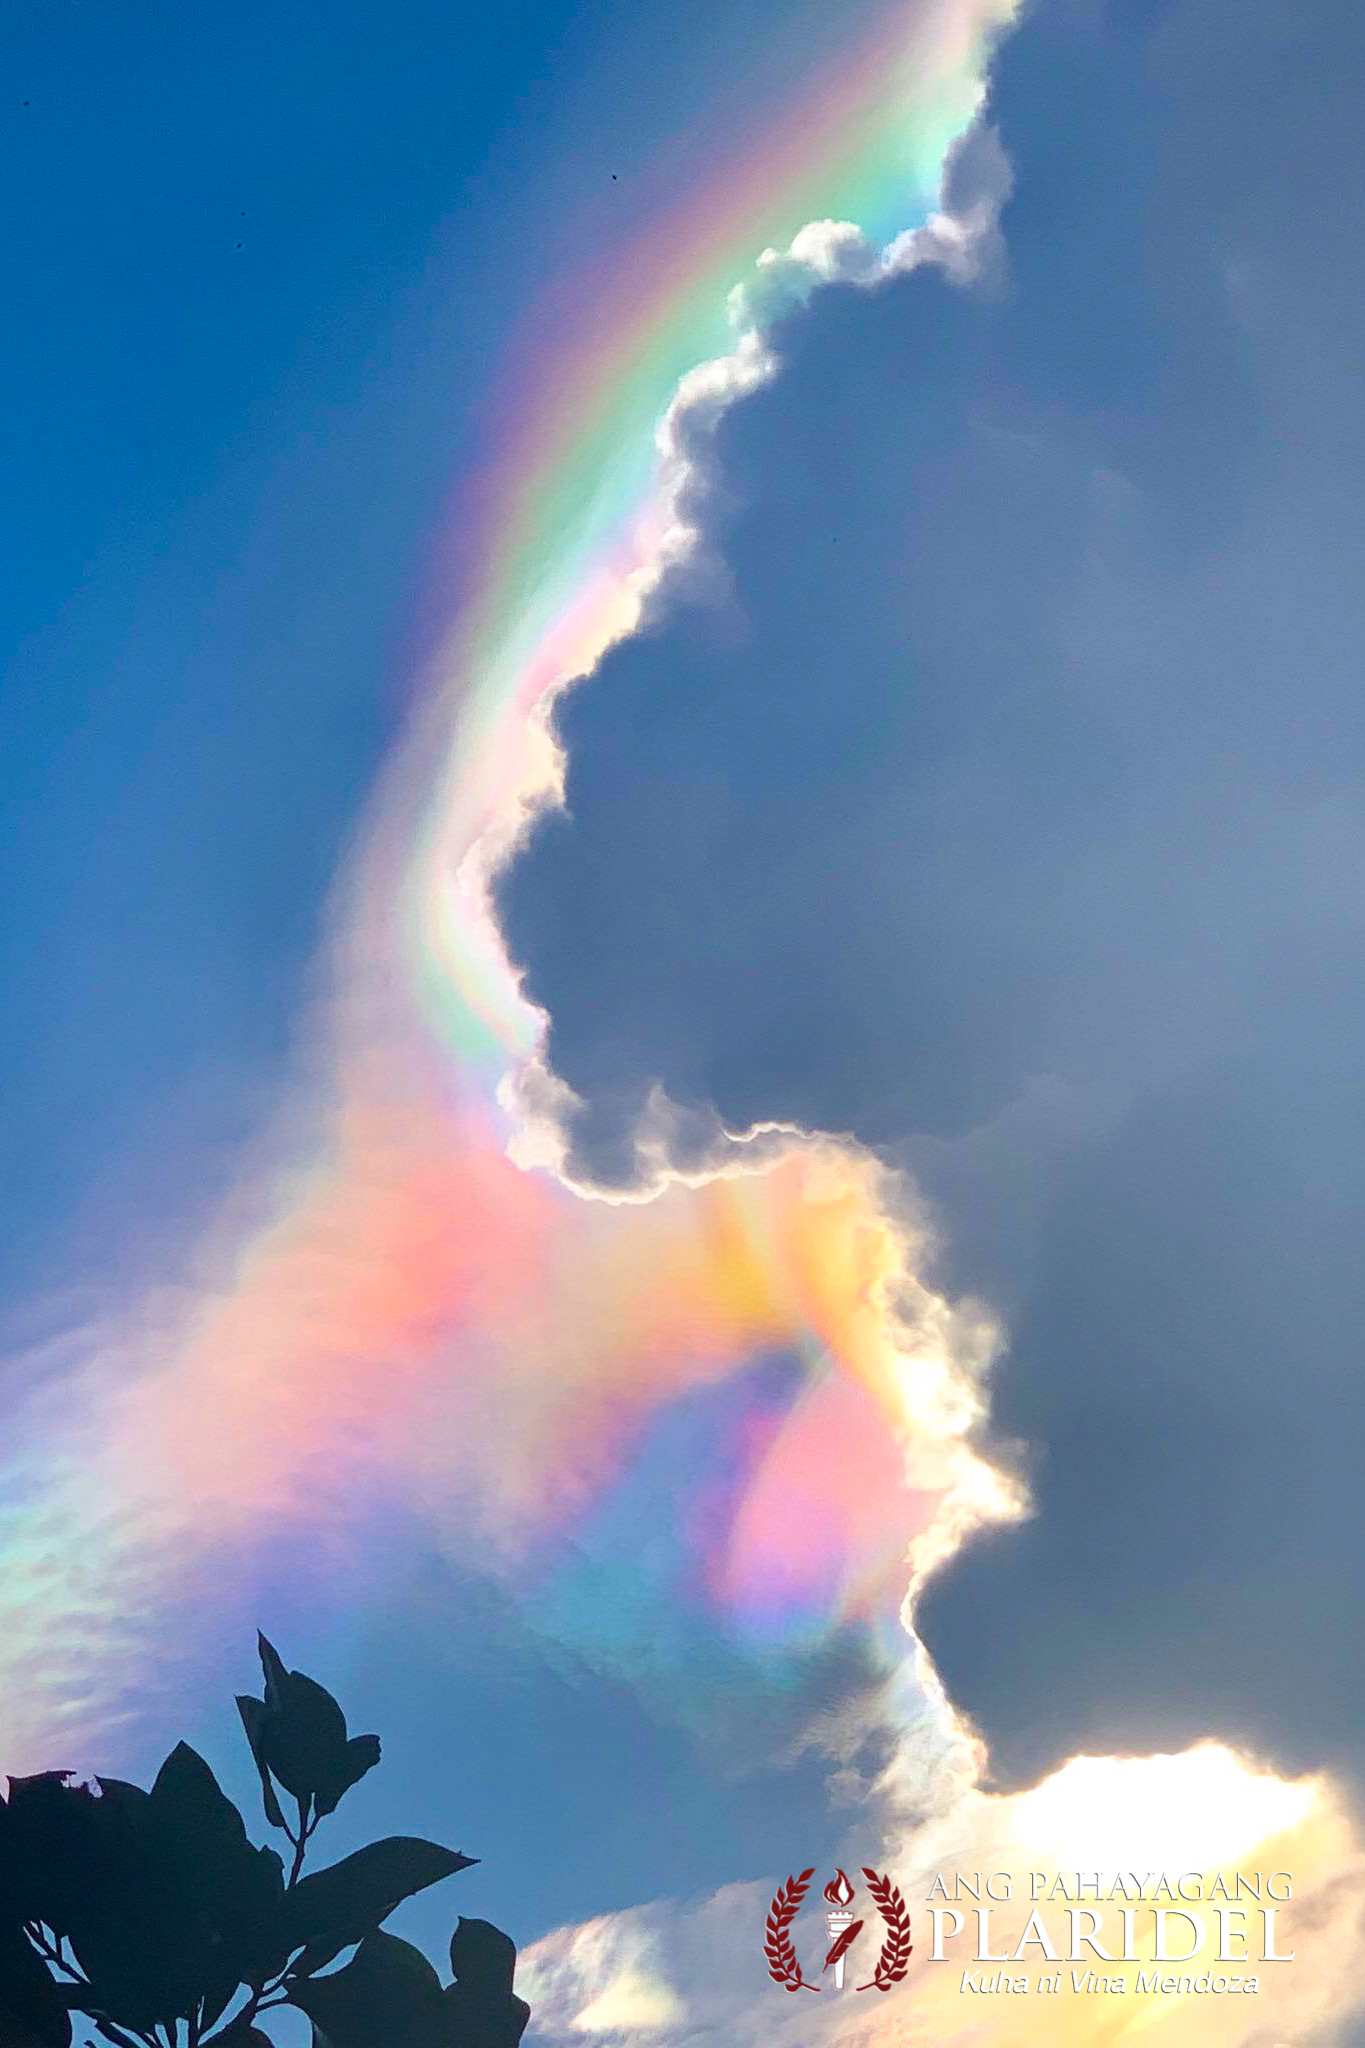 Rainbow Clouds Appeared Right After the Eclipse